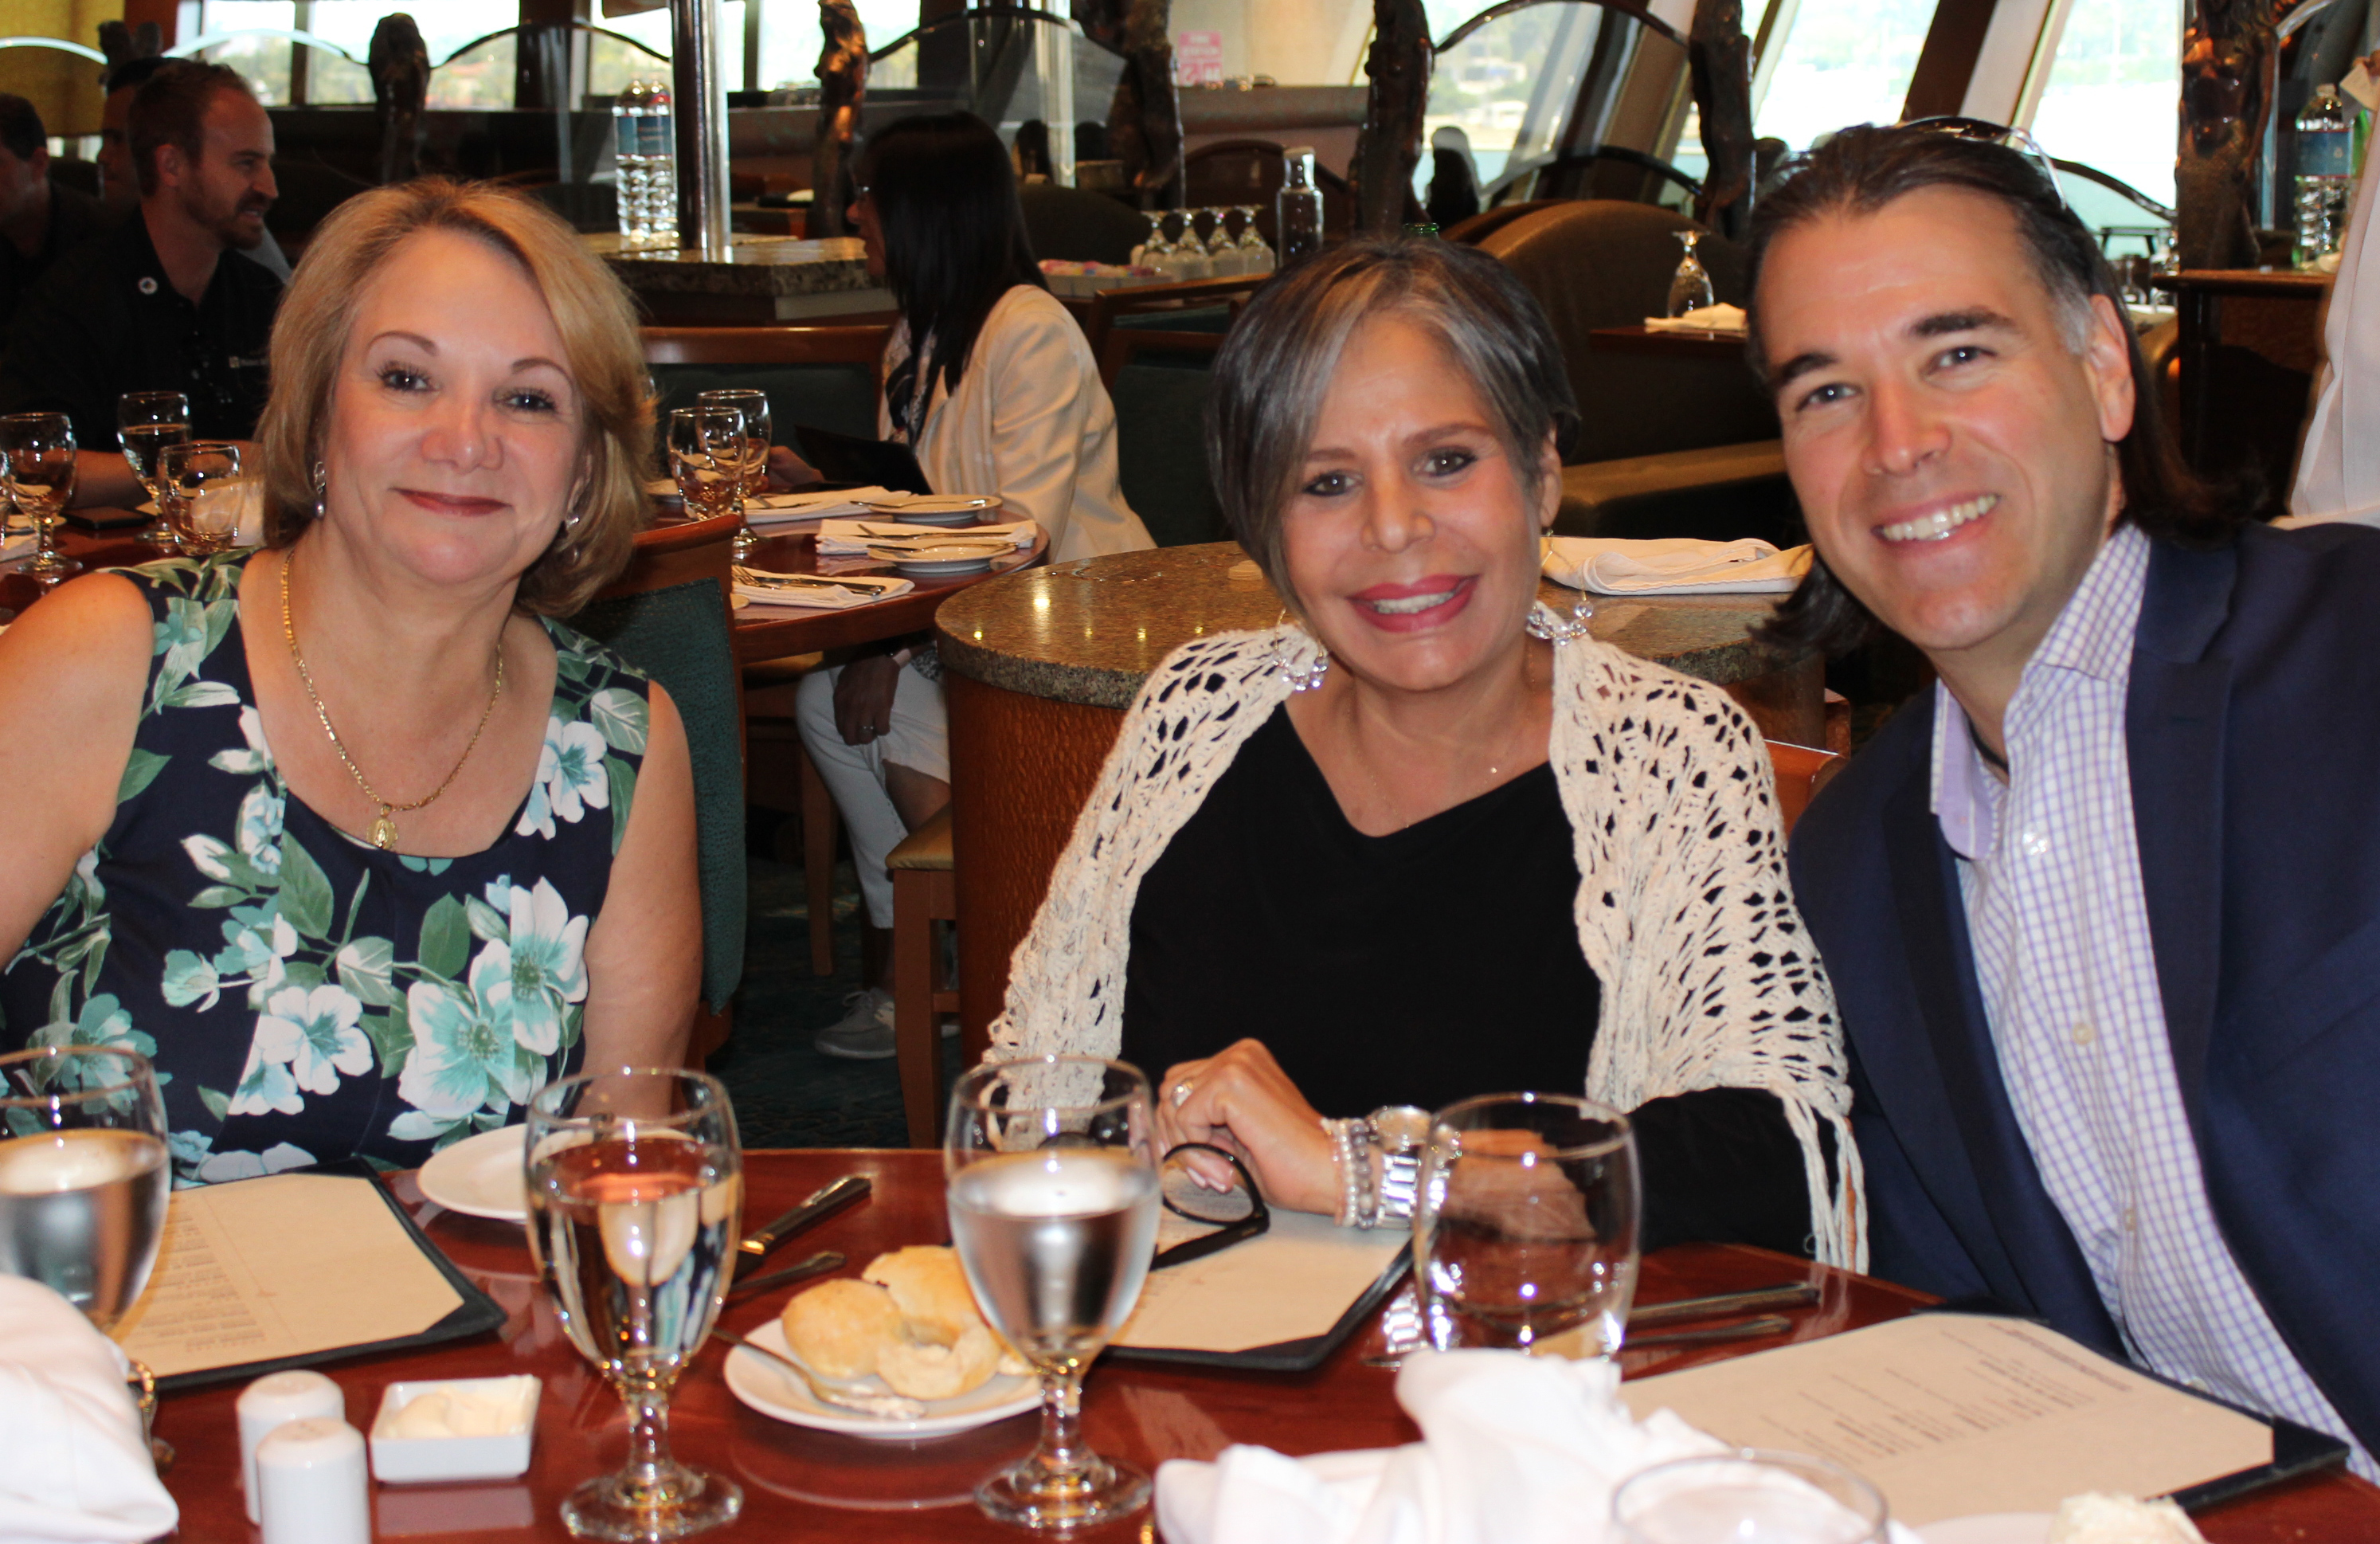 Doral Chamber of Commerce Carnival Cruise Luncheon 2019, Networking Event in Miami, Florida. Group photo at a table in Carnival Cruise dining hall.